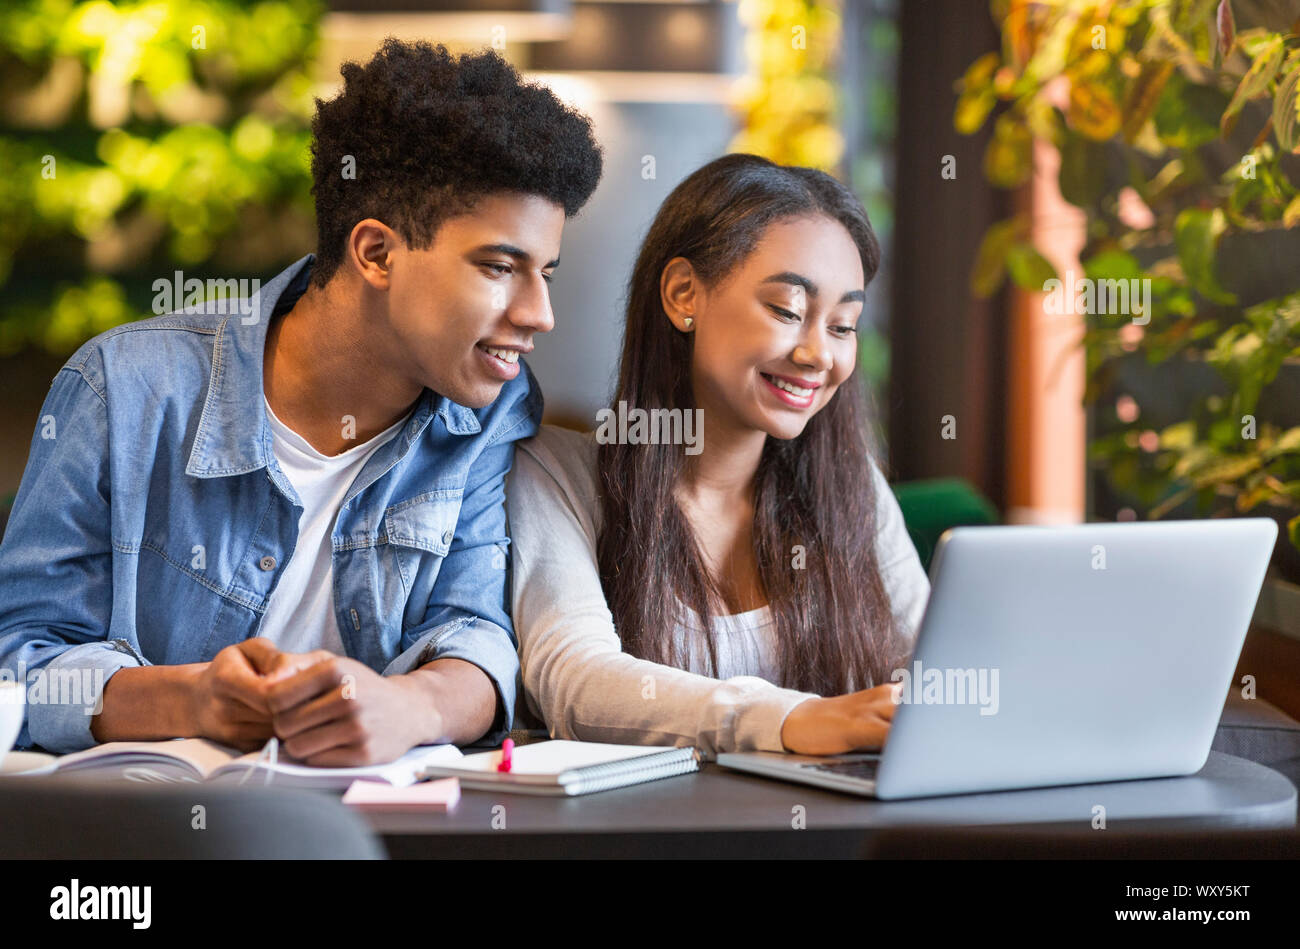 Studying students looking at laptop and smiling Stock Photo